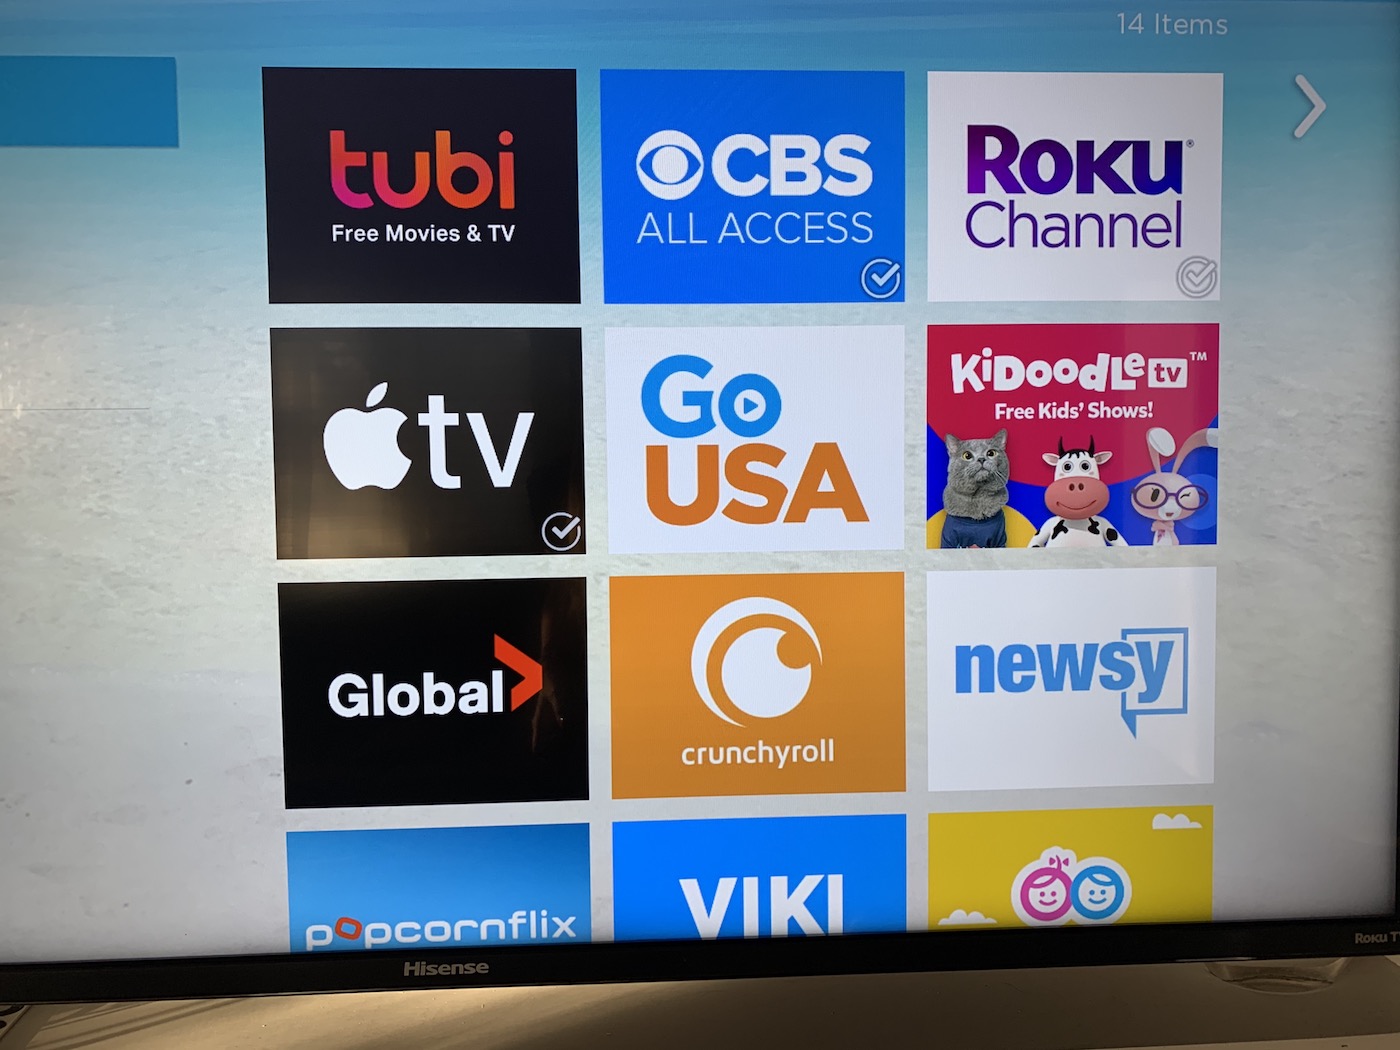 How To Watch Apple TV+ On A Roku